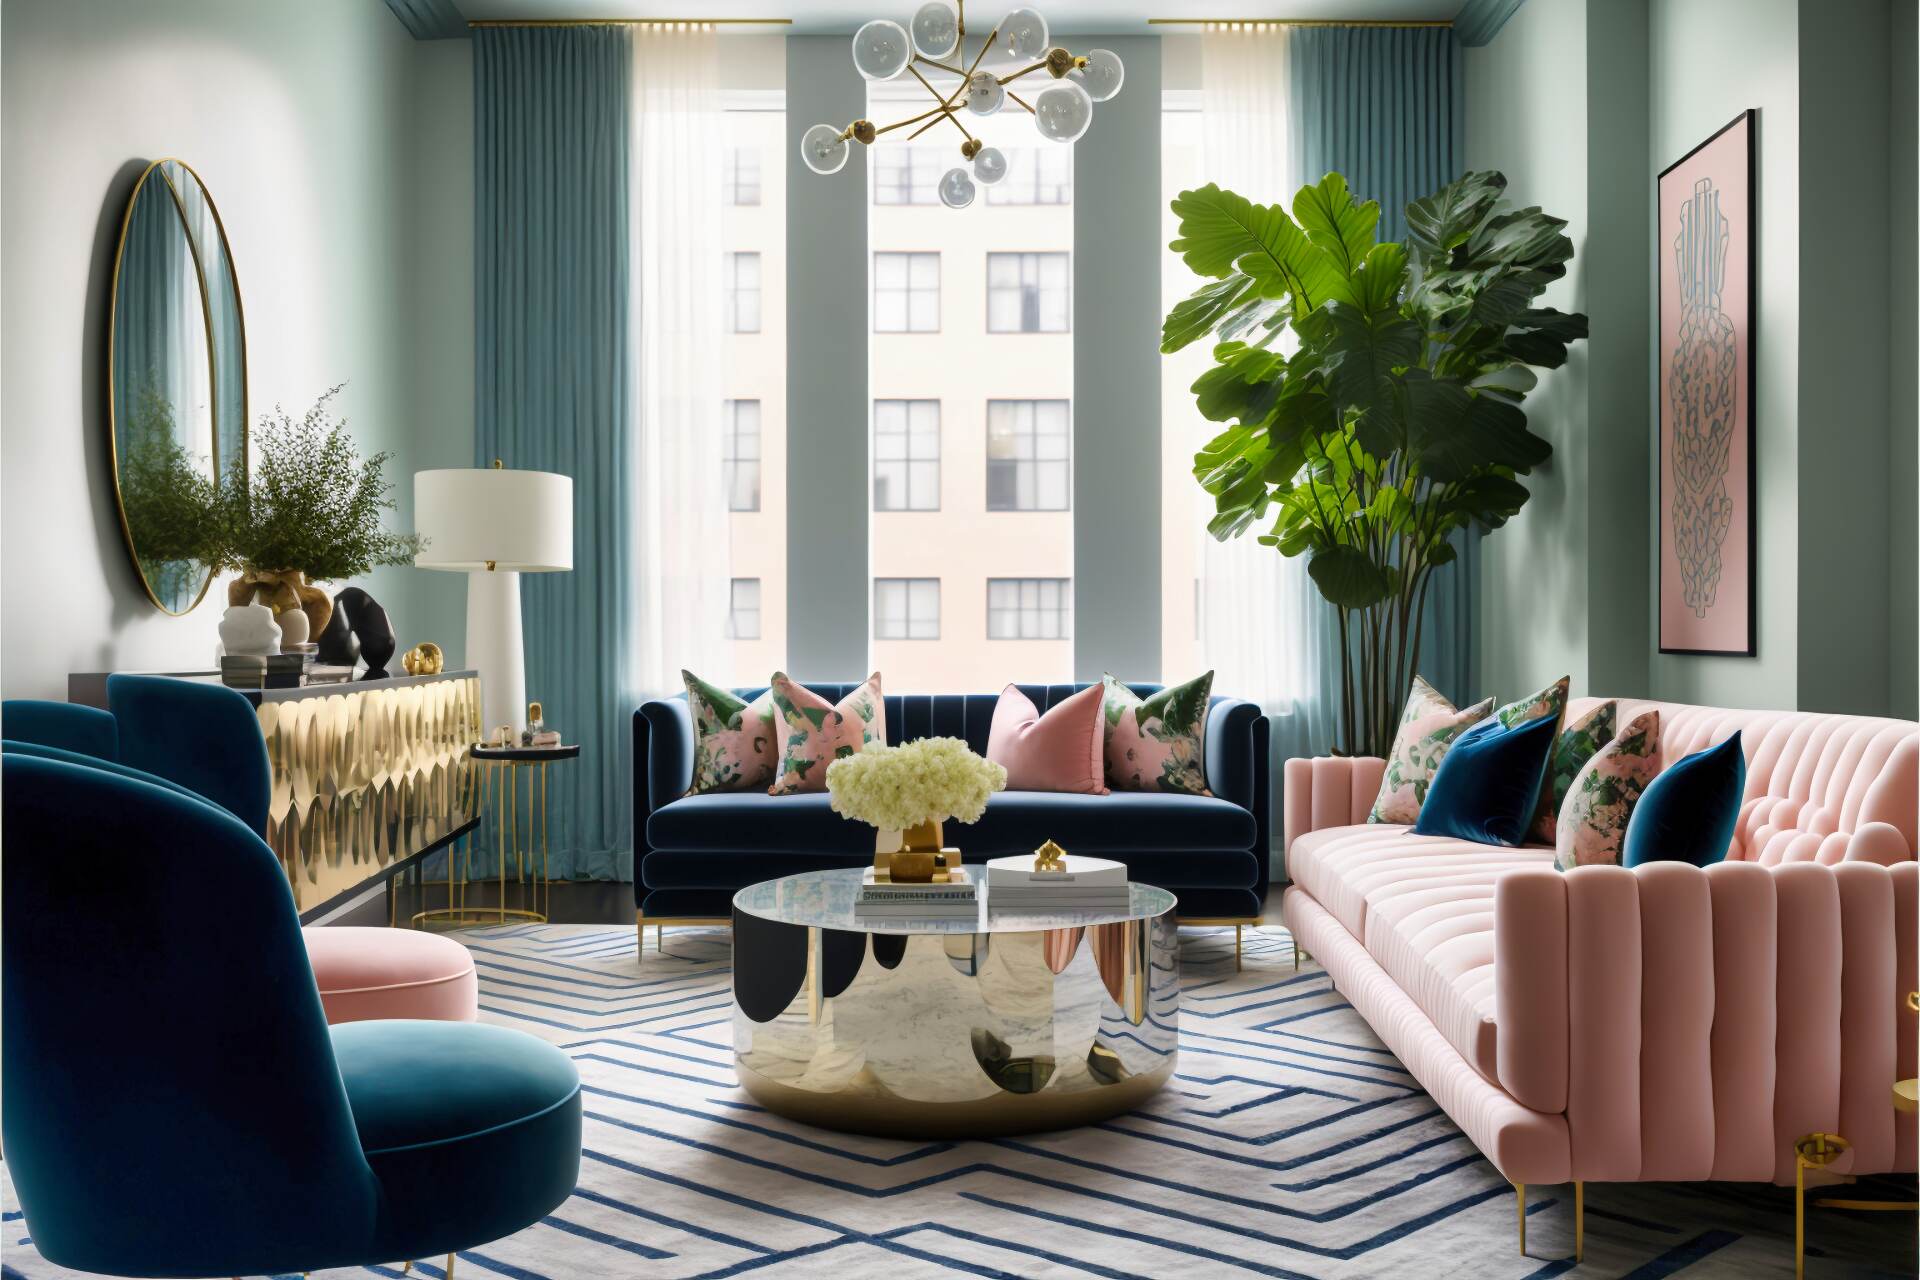 Rich Luxury Living Room - This Living Room Epitomizes Maximalist Style With Its Striking Pastel Colors, Lush Furniture, And Unique Art Pieces. A Luxurious Navy Couch Stands Next To A Glass-Top Coffee Table While Two Armchairs Balance Out The Other Side Of The Room. A Geometric Rug Adds Dimension To The Space And Various Plants And Candles Provide An Inviting Atmosphere. Mounted On The Wall Is An Impressive Flat-Screen Smart Tv, Turning This Living Room Into The Ideal Home Entertainment Center.